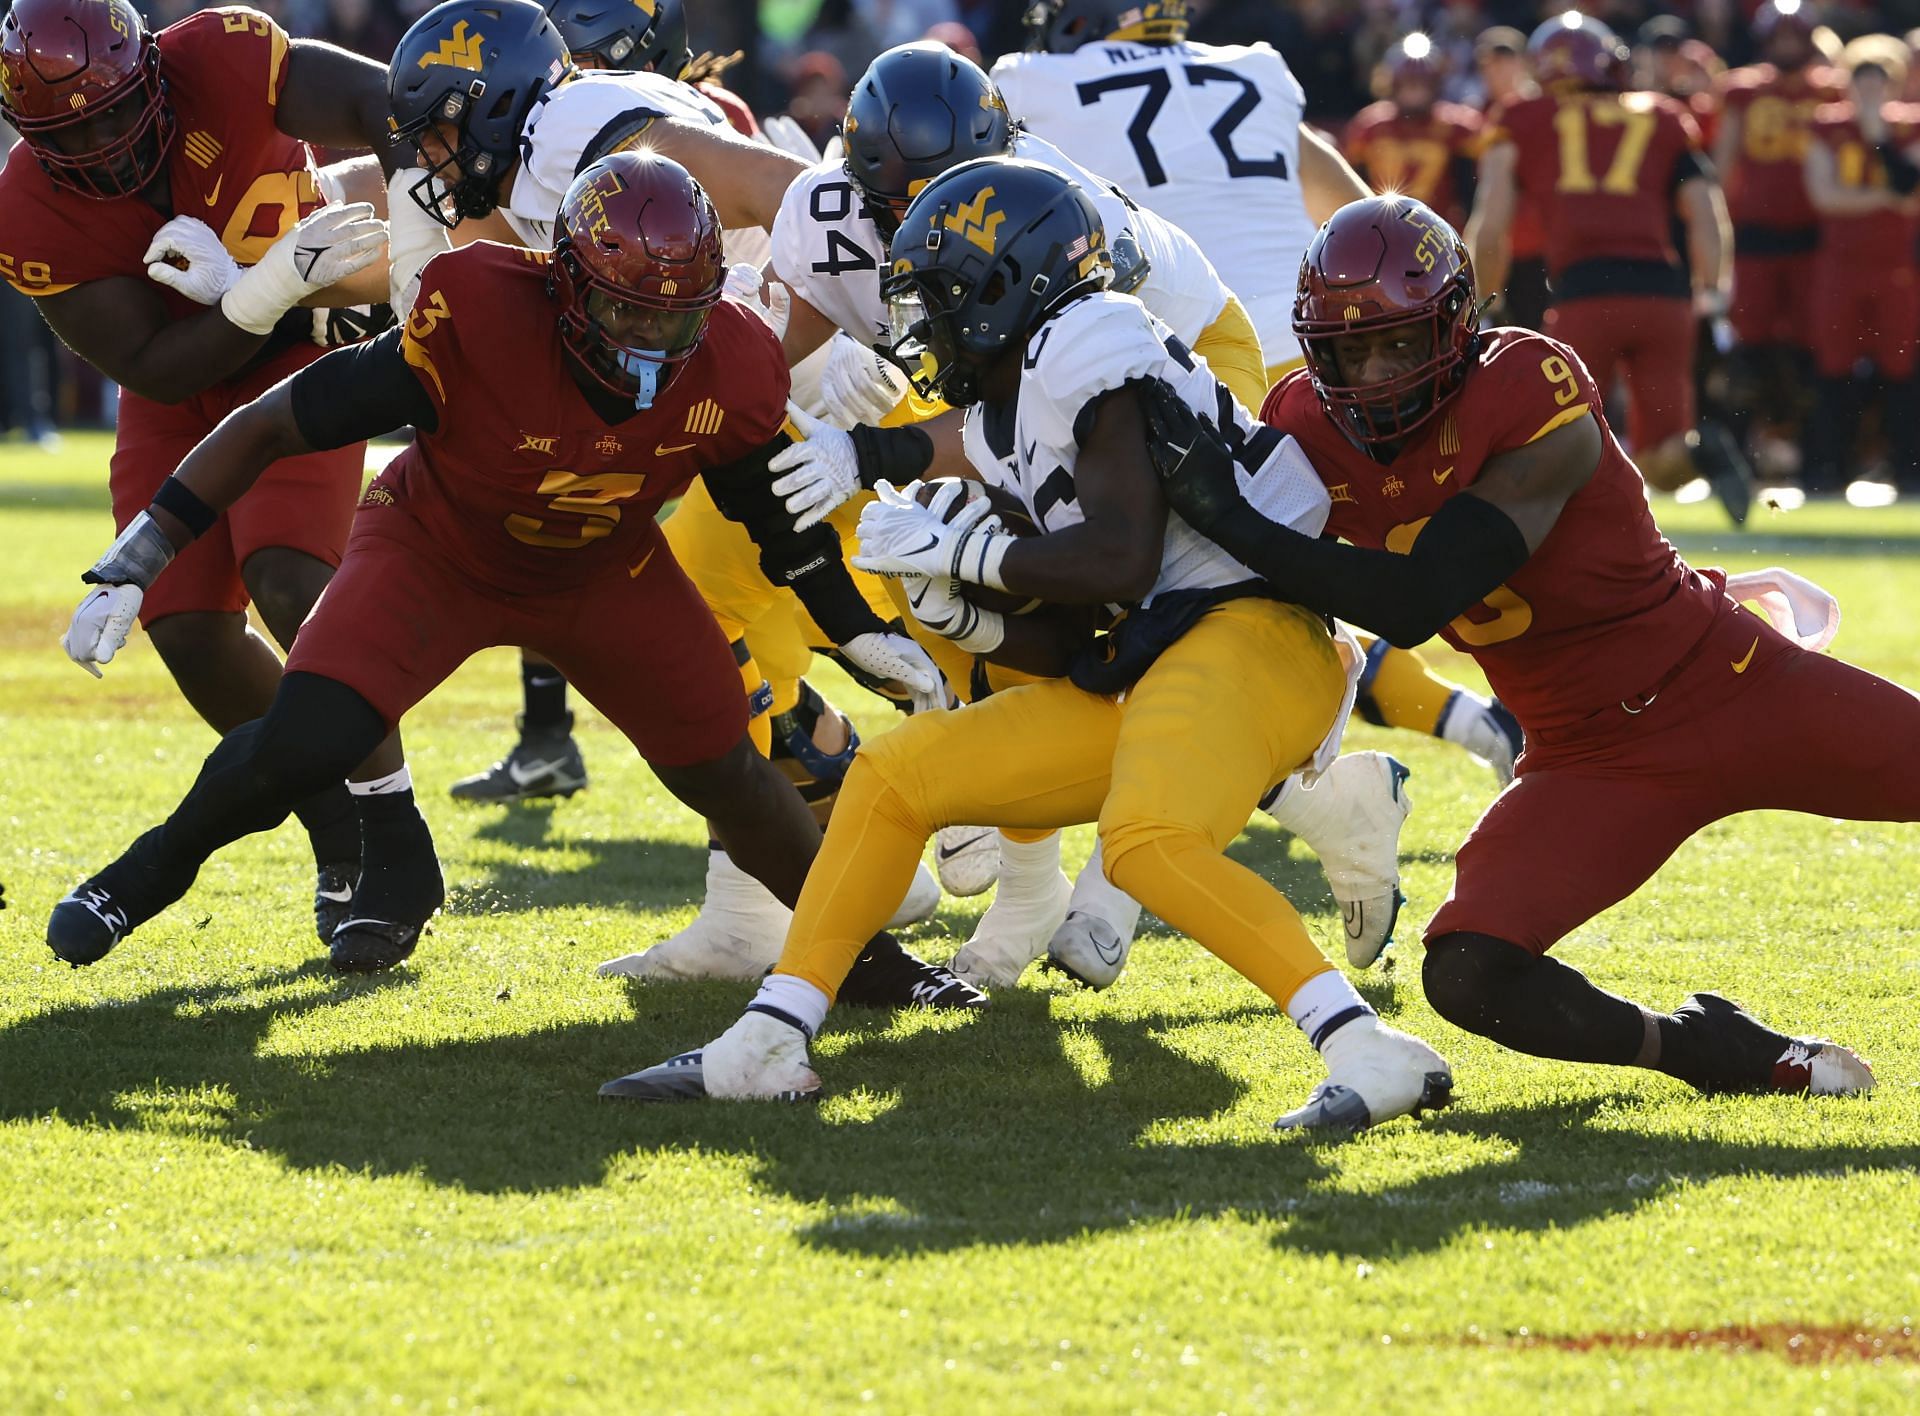 Running back Justin Johnson Jr. #26 of the West Virginia Mountaineers is tackled by defensive end Will McDonald IV #9 of the Iowa State Cyclones